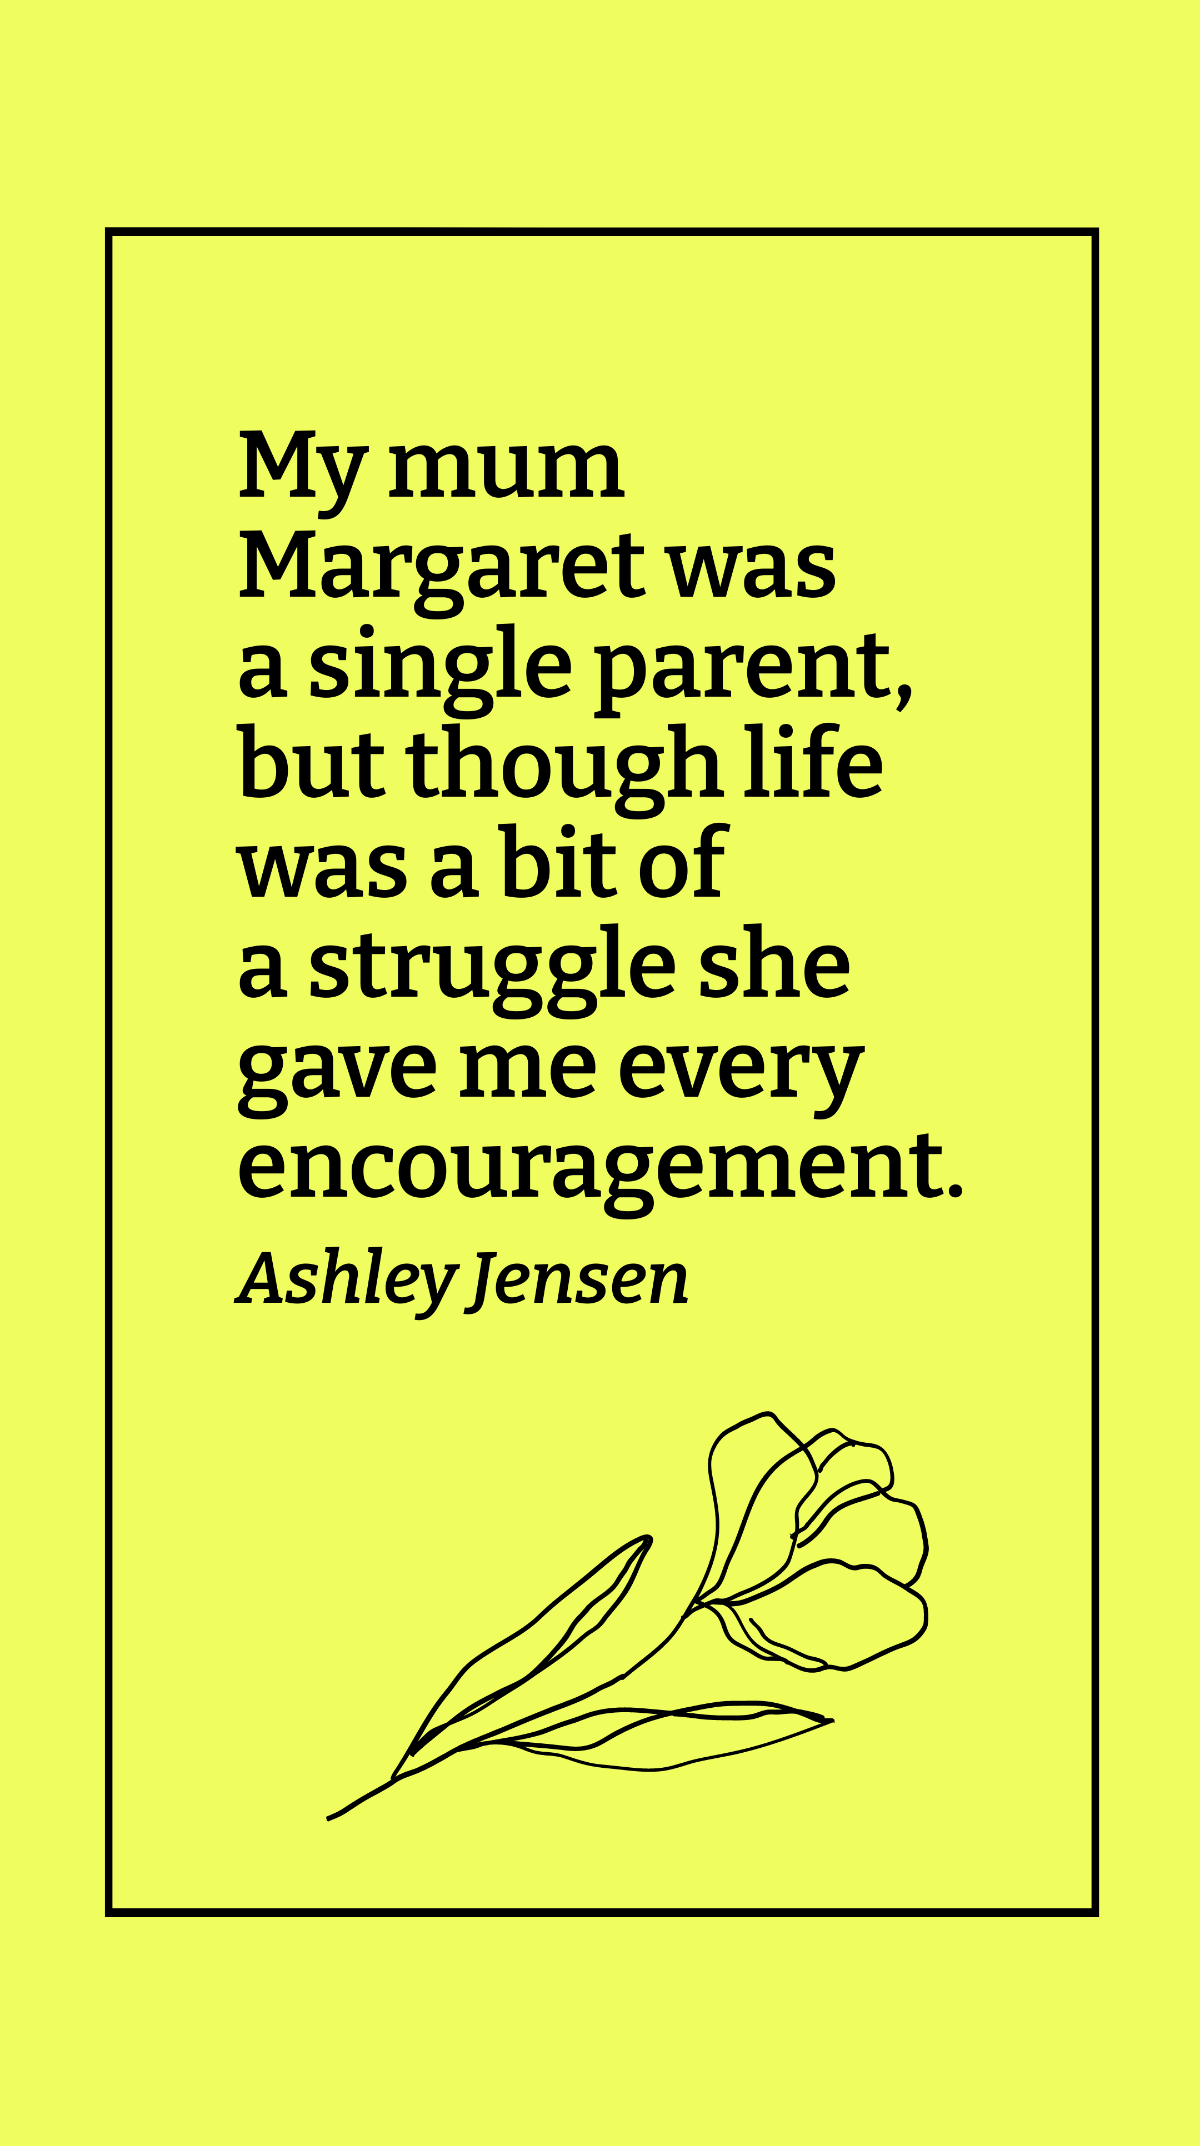 Ashley Jensen - My mum Margaret was a single parent, but though life was a bit of a struggle she gave me every encouragement.